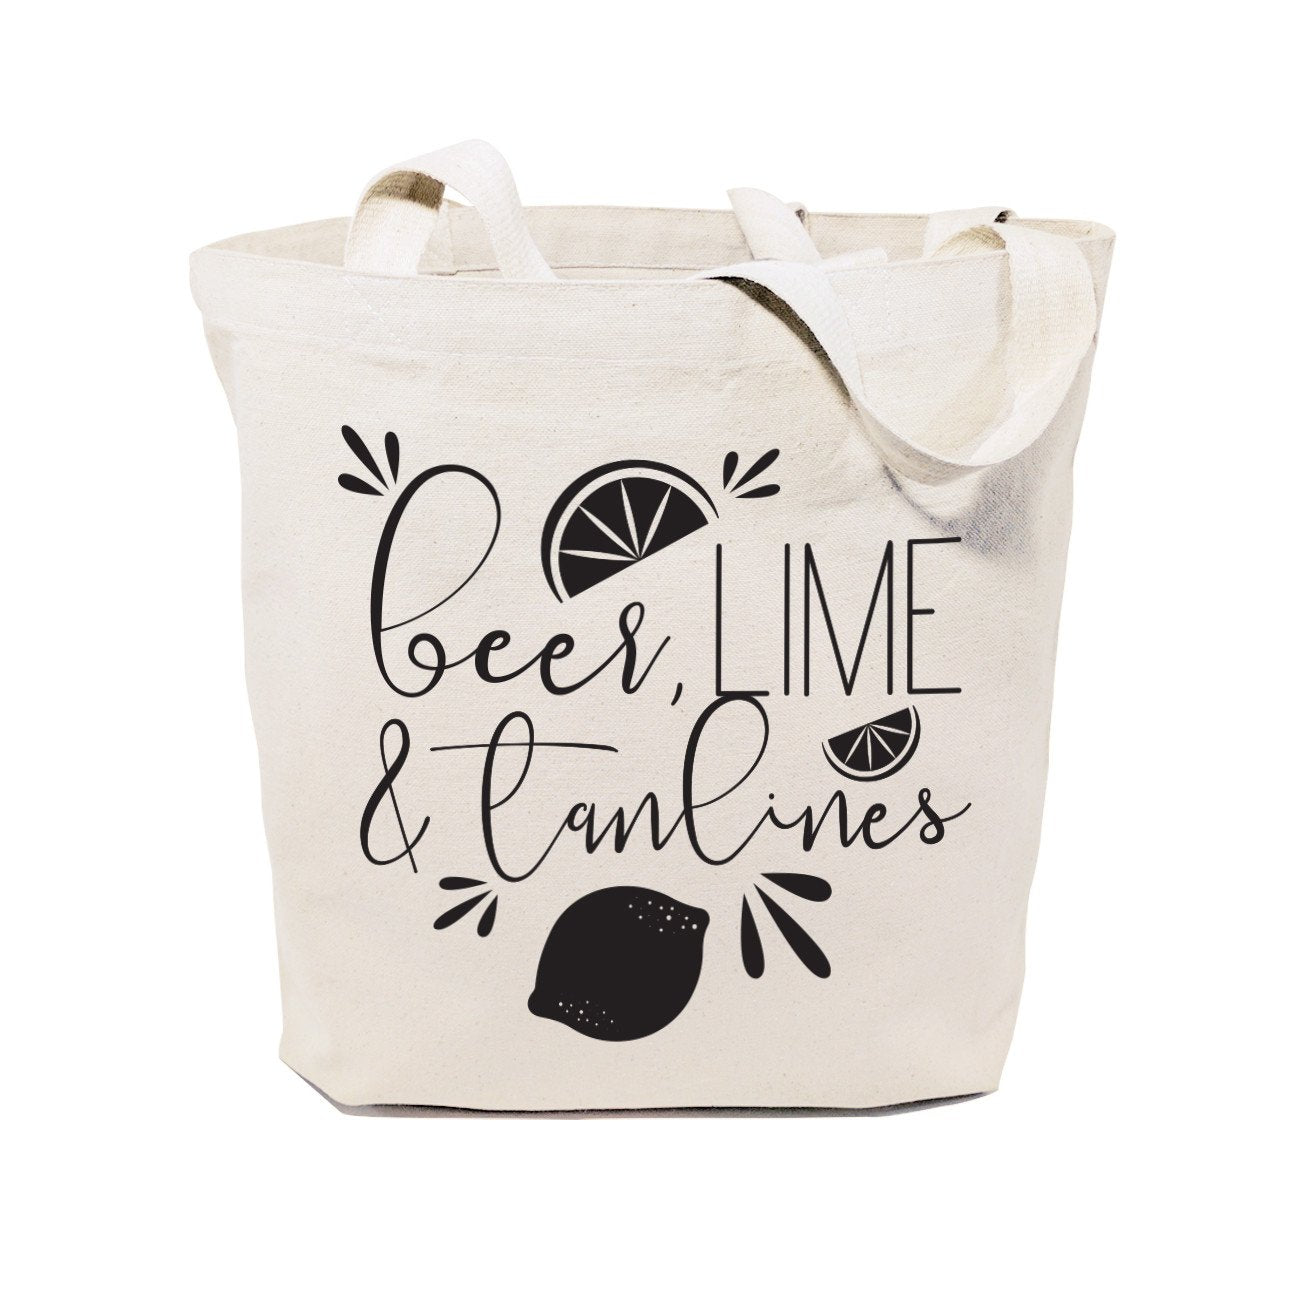 Beer, Lime and Tan Lines Canvas Tote Bag - Saltwater Bodega